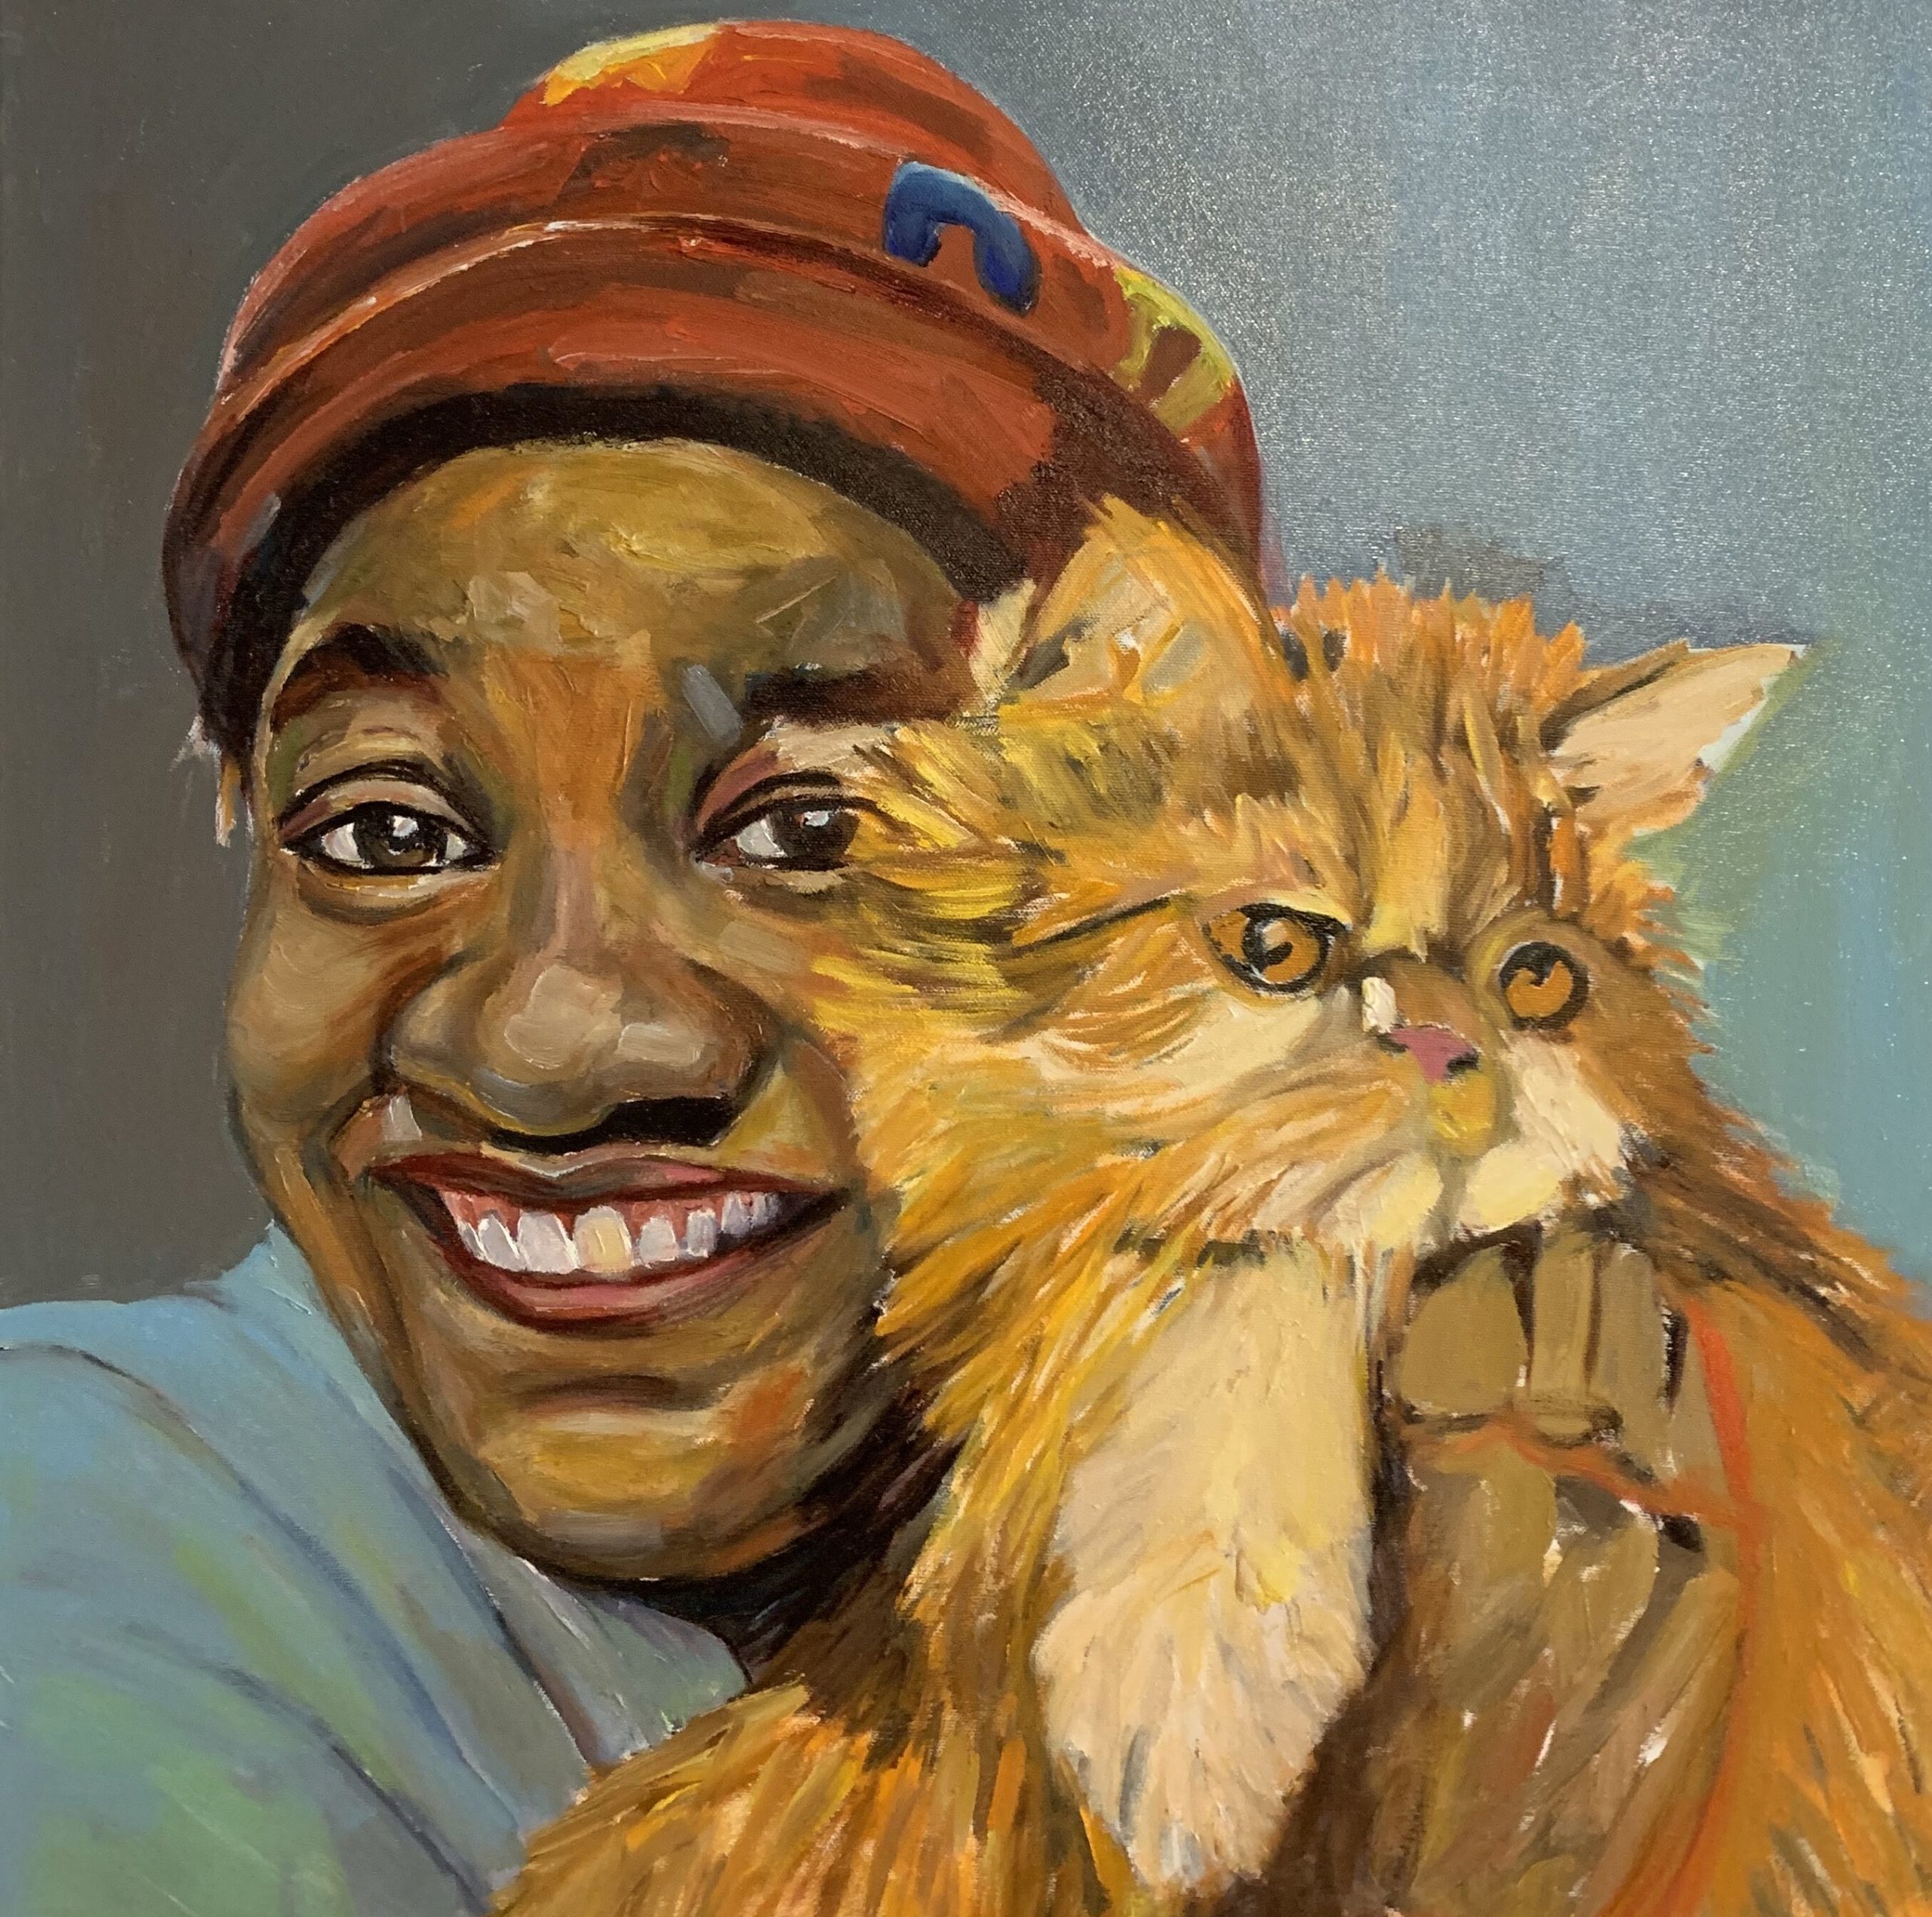 Self Portrait with Clydie (in progress) by Beverly McIver